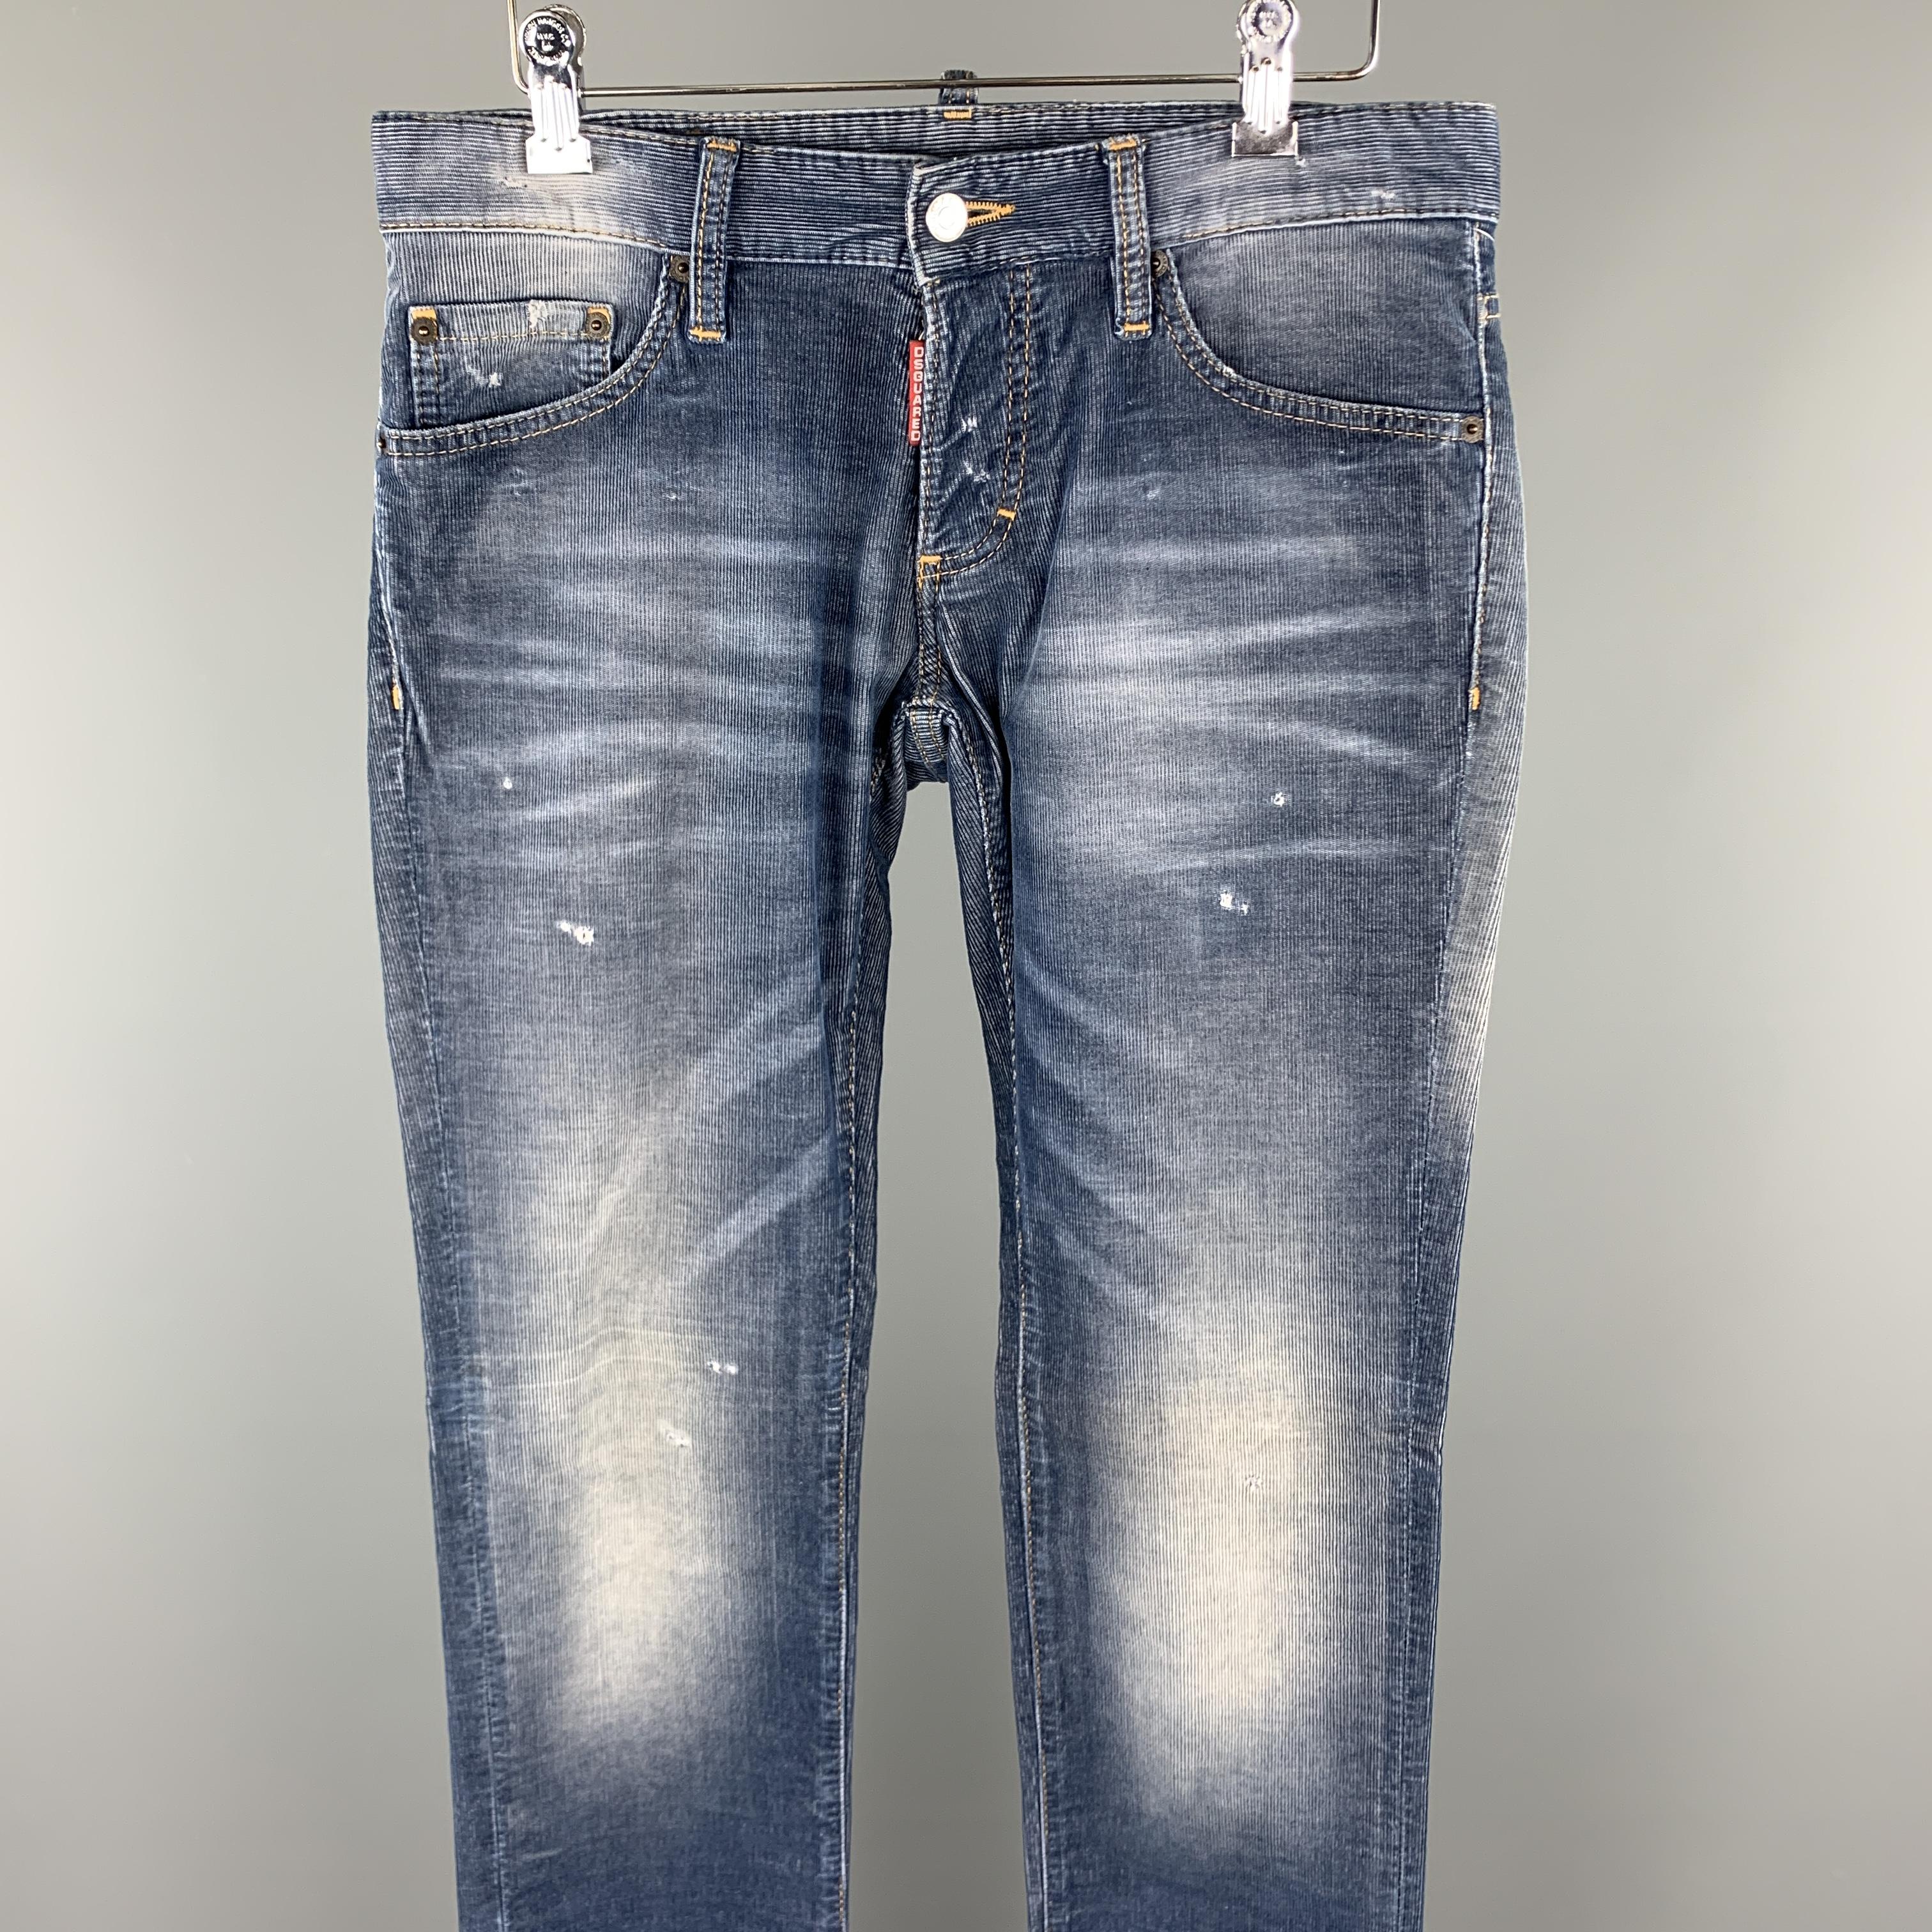 DSQUARED2 casual pants comes in a blue washed corduroy featuring a denim effect, contrast stitching, distressed details, and a button fly closure. Made in Italy.

Excellent Pre-Owned Condition.
Marked: IT 44

Measurements:

Waist: 32 in.
Rise: 7 in.